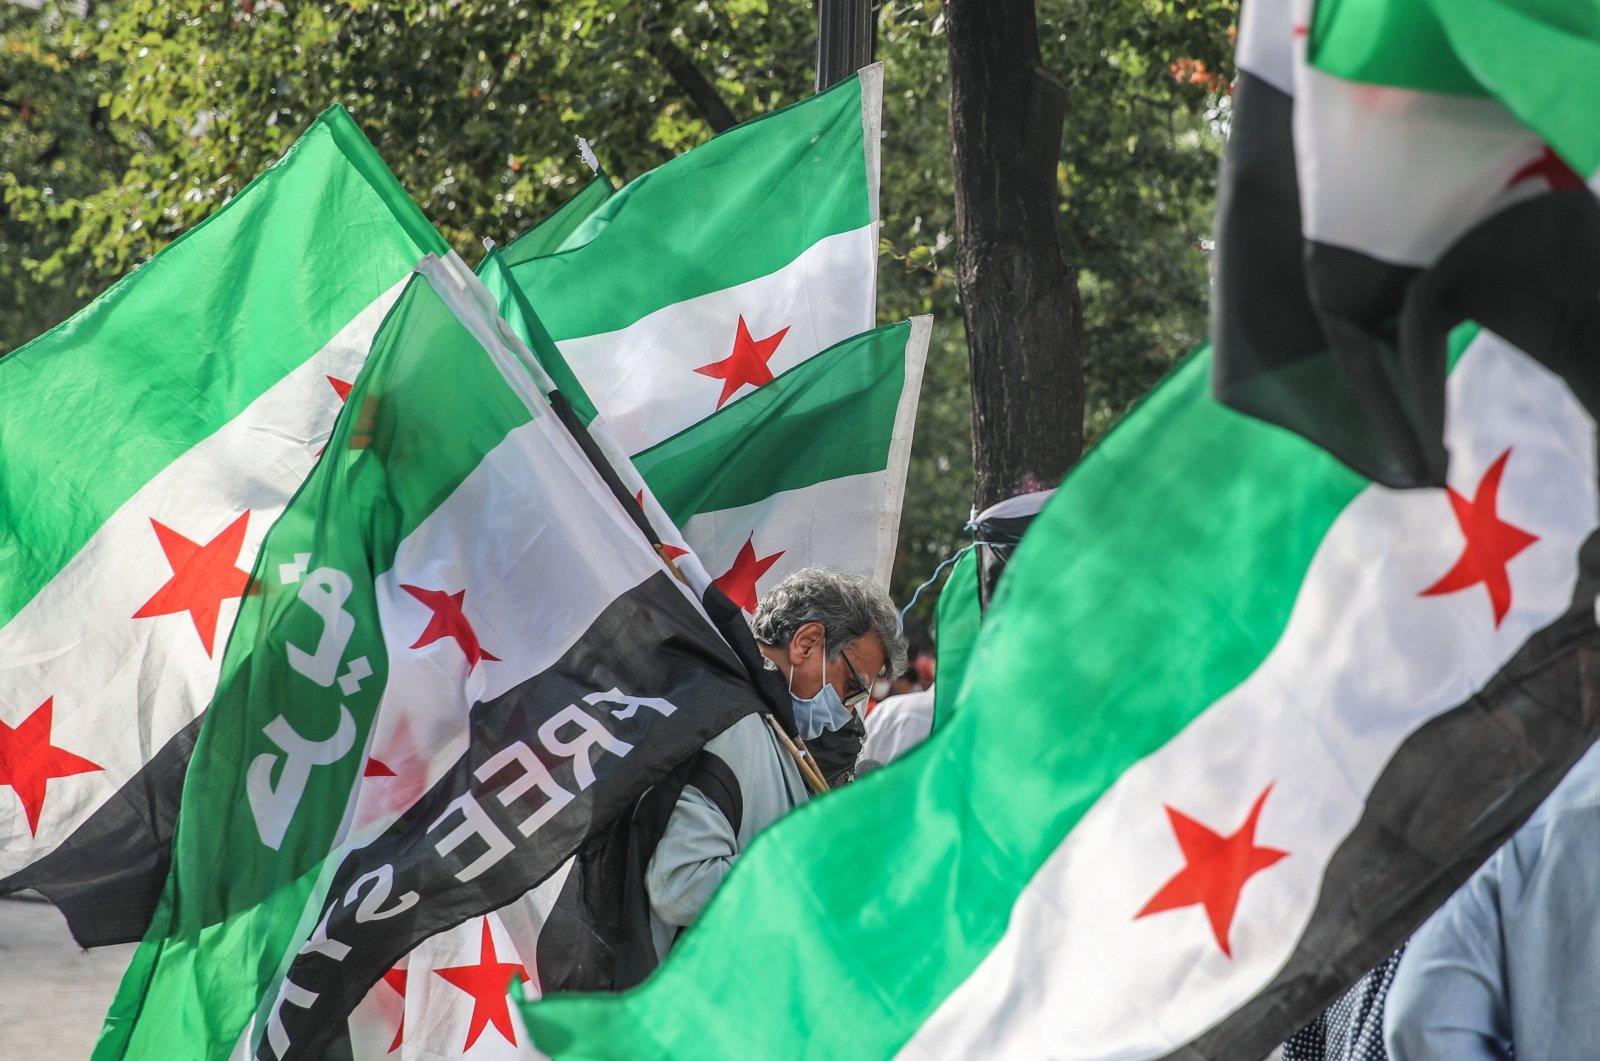 A Syrian activist carries the Syrian Revolution flag during a rally for the anniversary of 2013 Chemical Attack on Ghota, at Fontaine des Innocents in the Les Halles district in the 1st arrondissement of Paris, France. 21 August 2020. (EPA Photo)